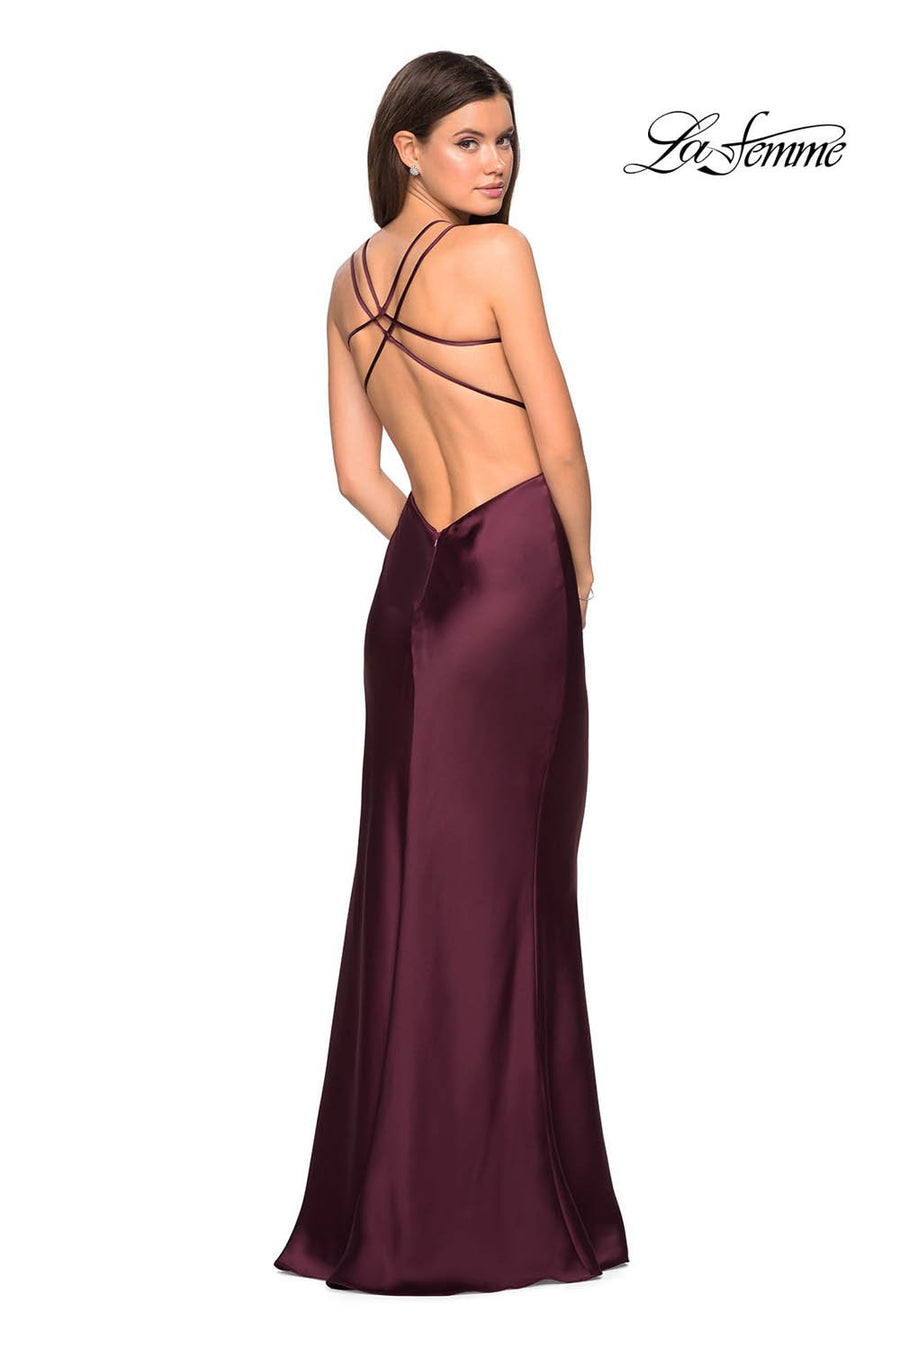 La Femme 27010 prom dress images.  La Femme 27010 is available in these colors: Blush, Navy, Wine.